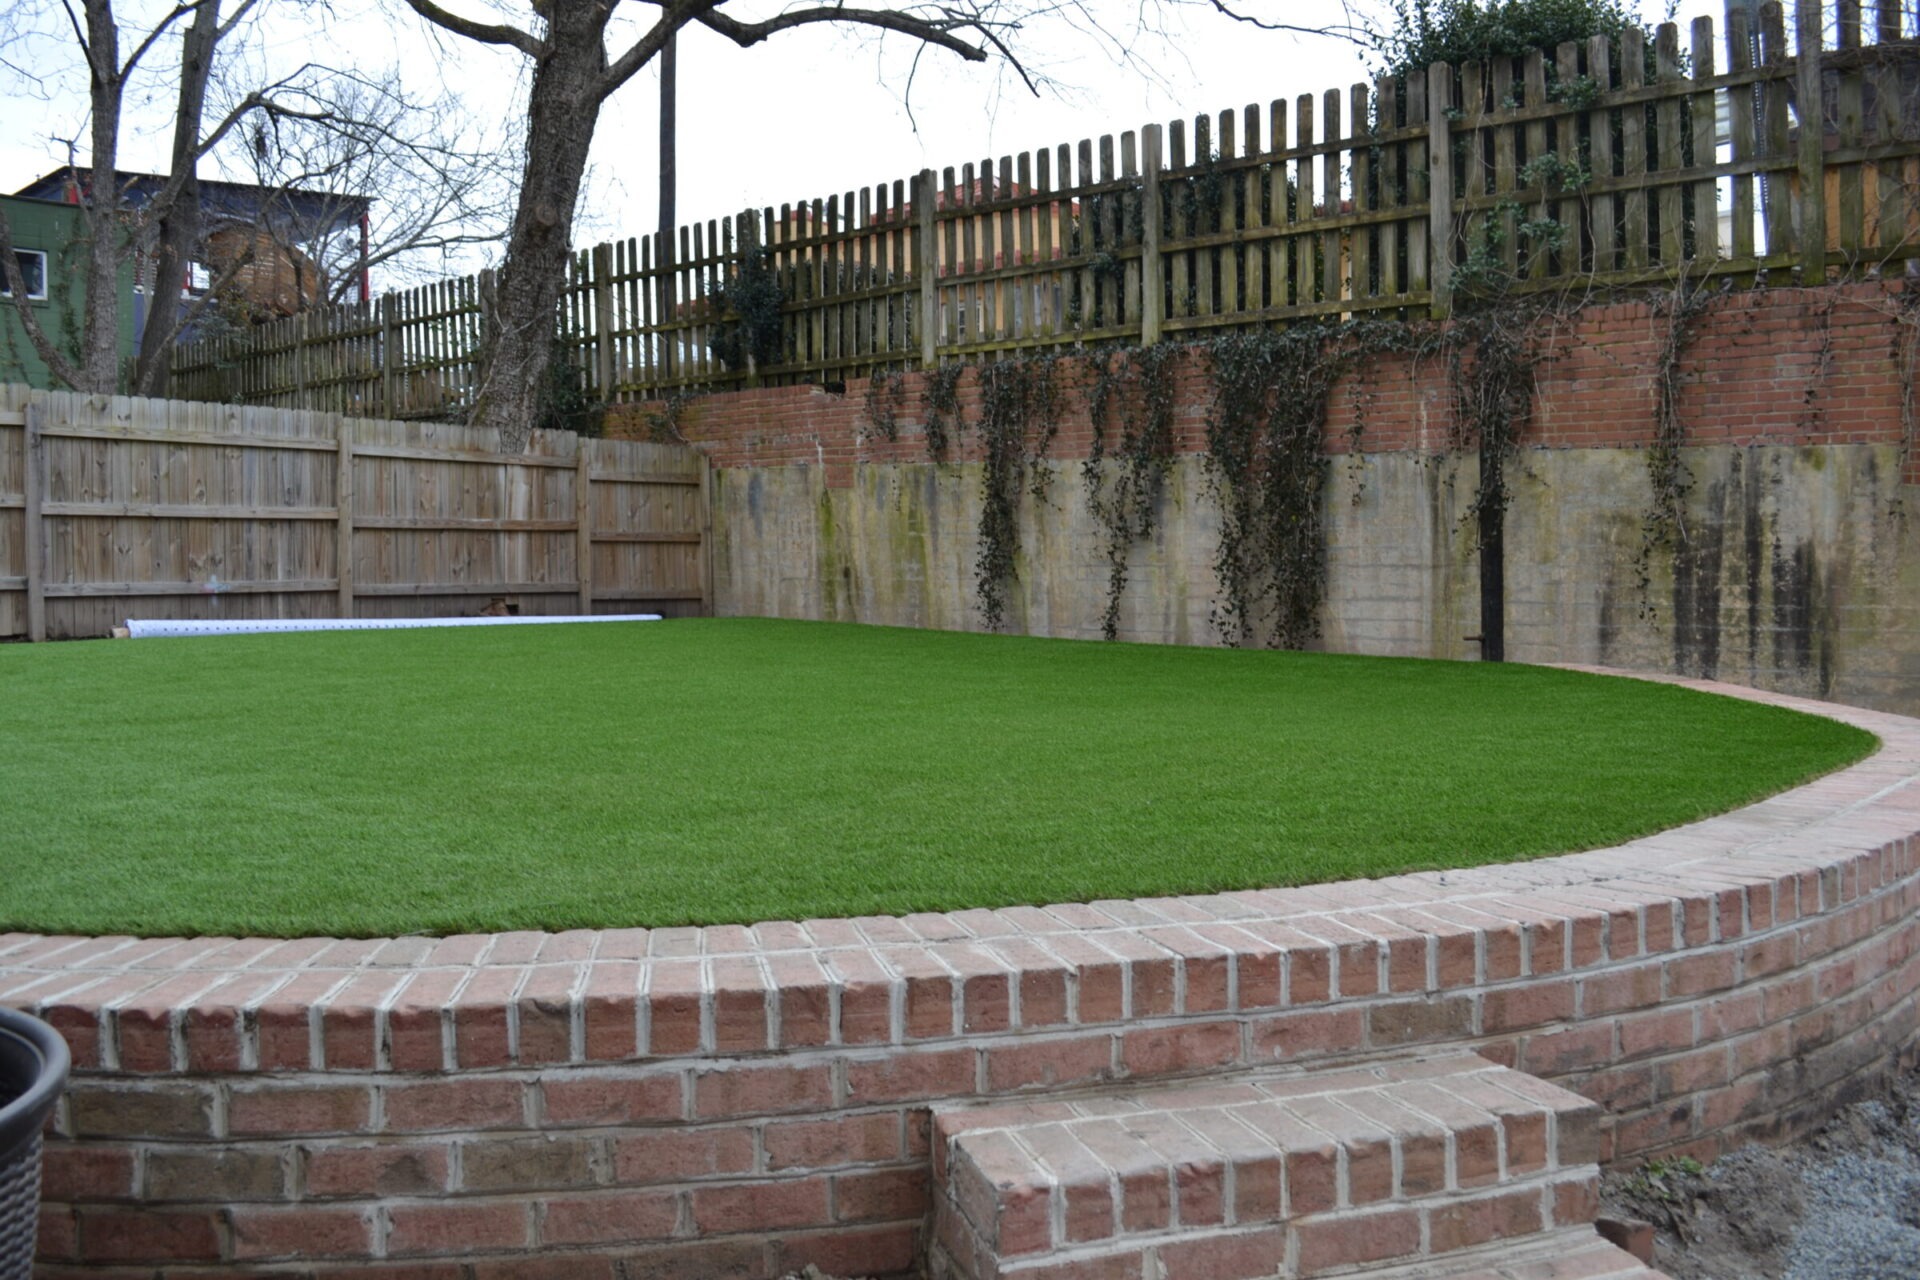 An outdoor space features a lush green lawn encircled by a curved brick retaining wall, with a wooden fence and vines visible in the background.